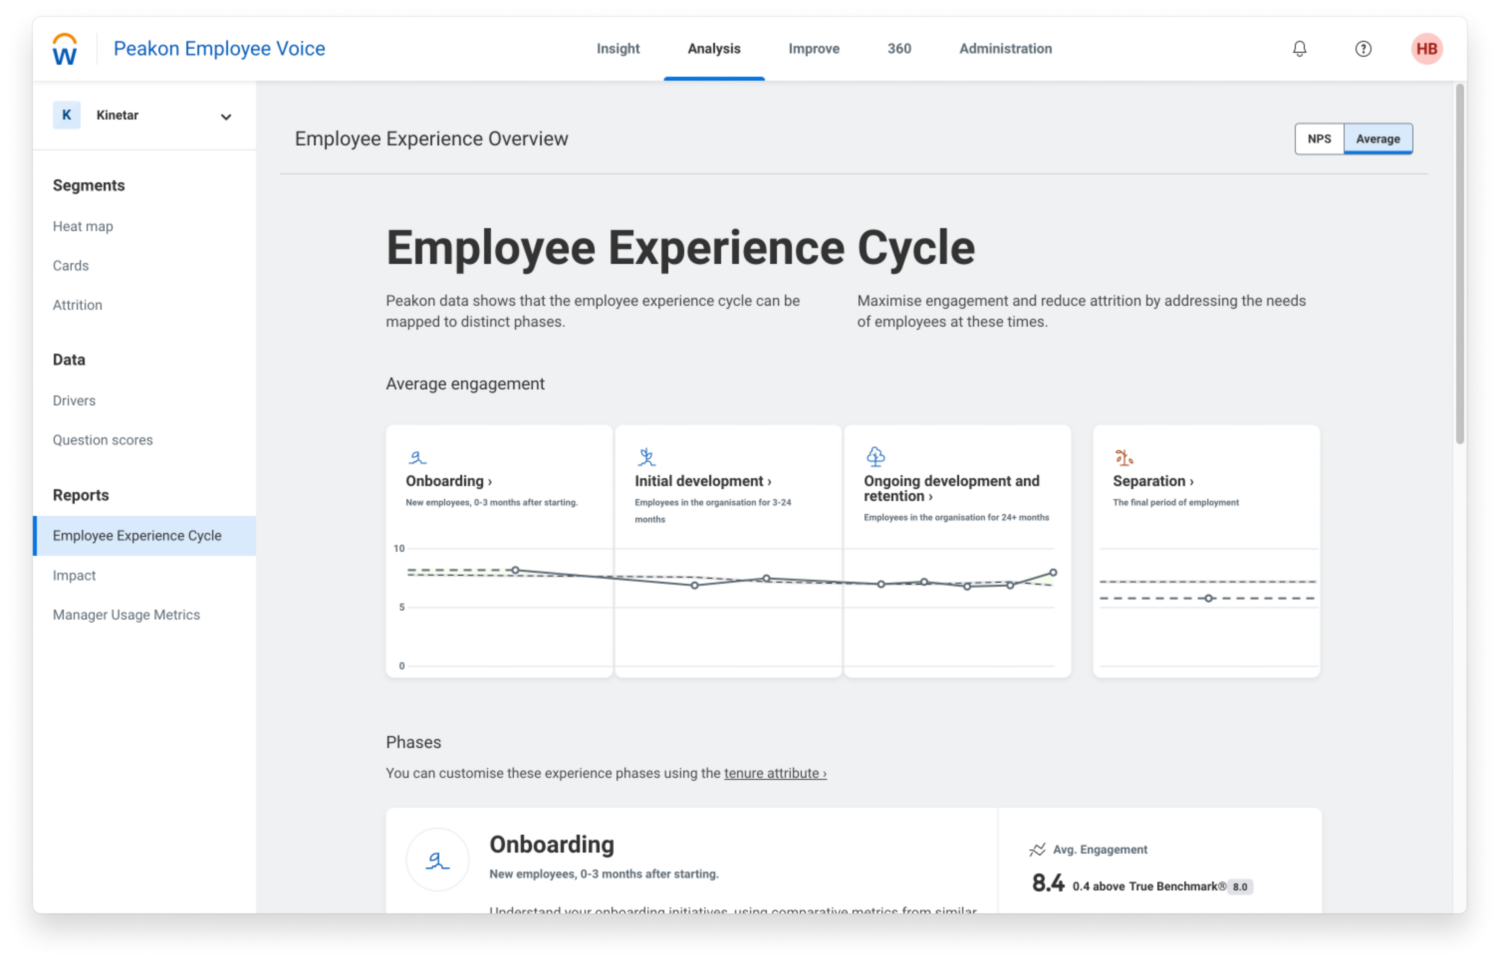 Workday Peakon Employee Voice dashboard showing engagement metrics for the employee experience cycle.